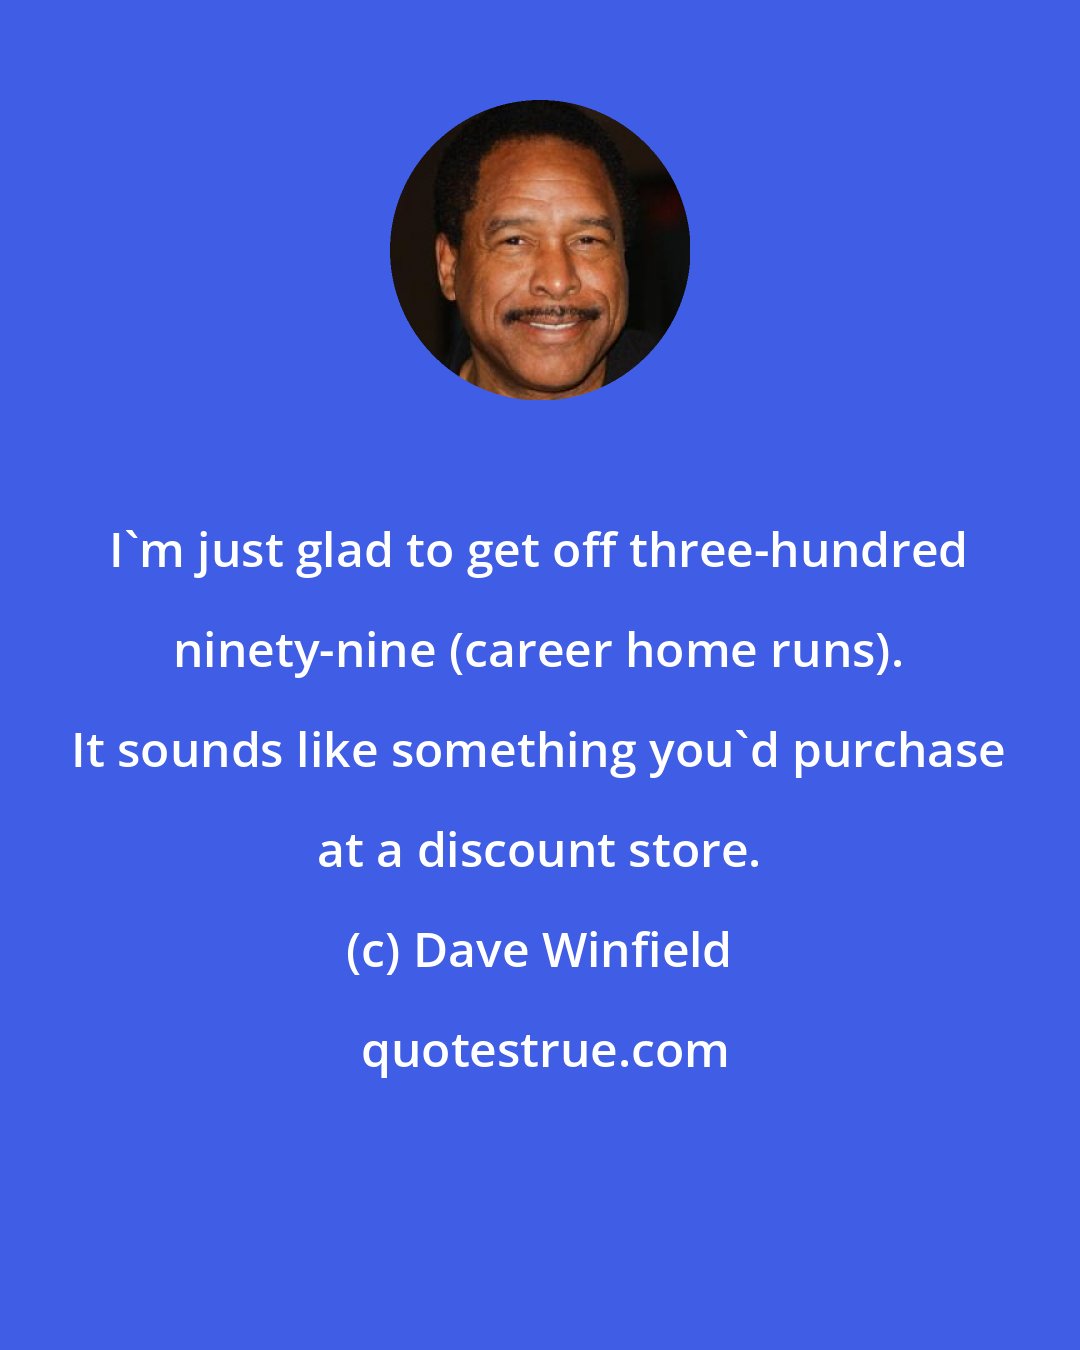 Dave Winfield: I'm just glad to get off three-hundred ninety-nine (career home runs). It sounds like something you'd purchase at a discount store.